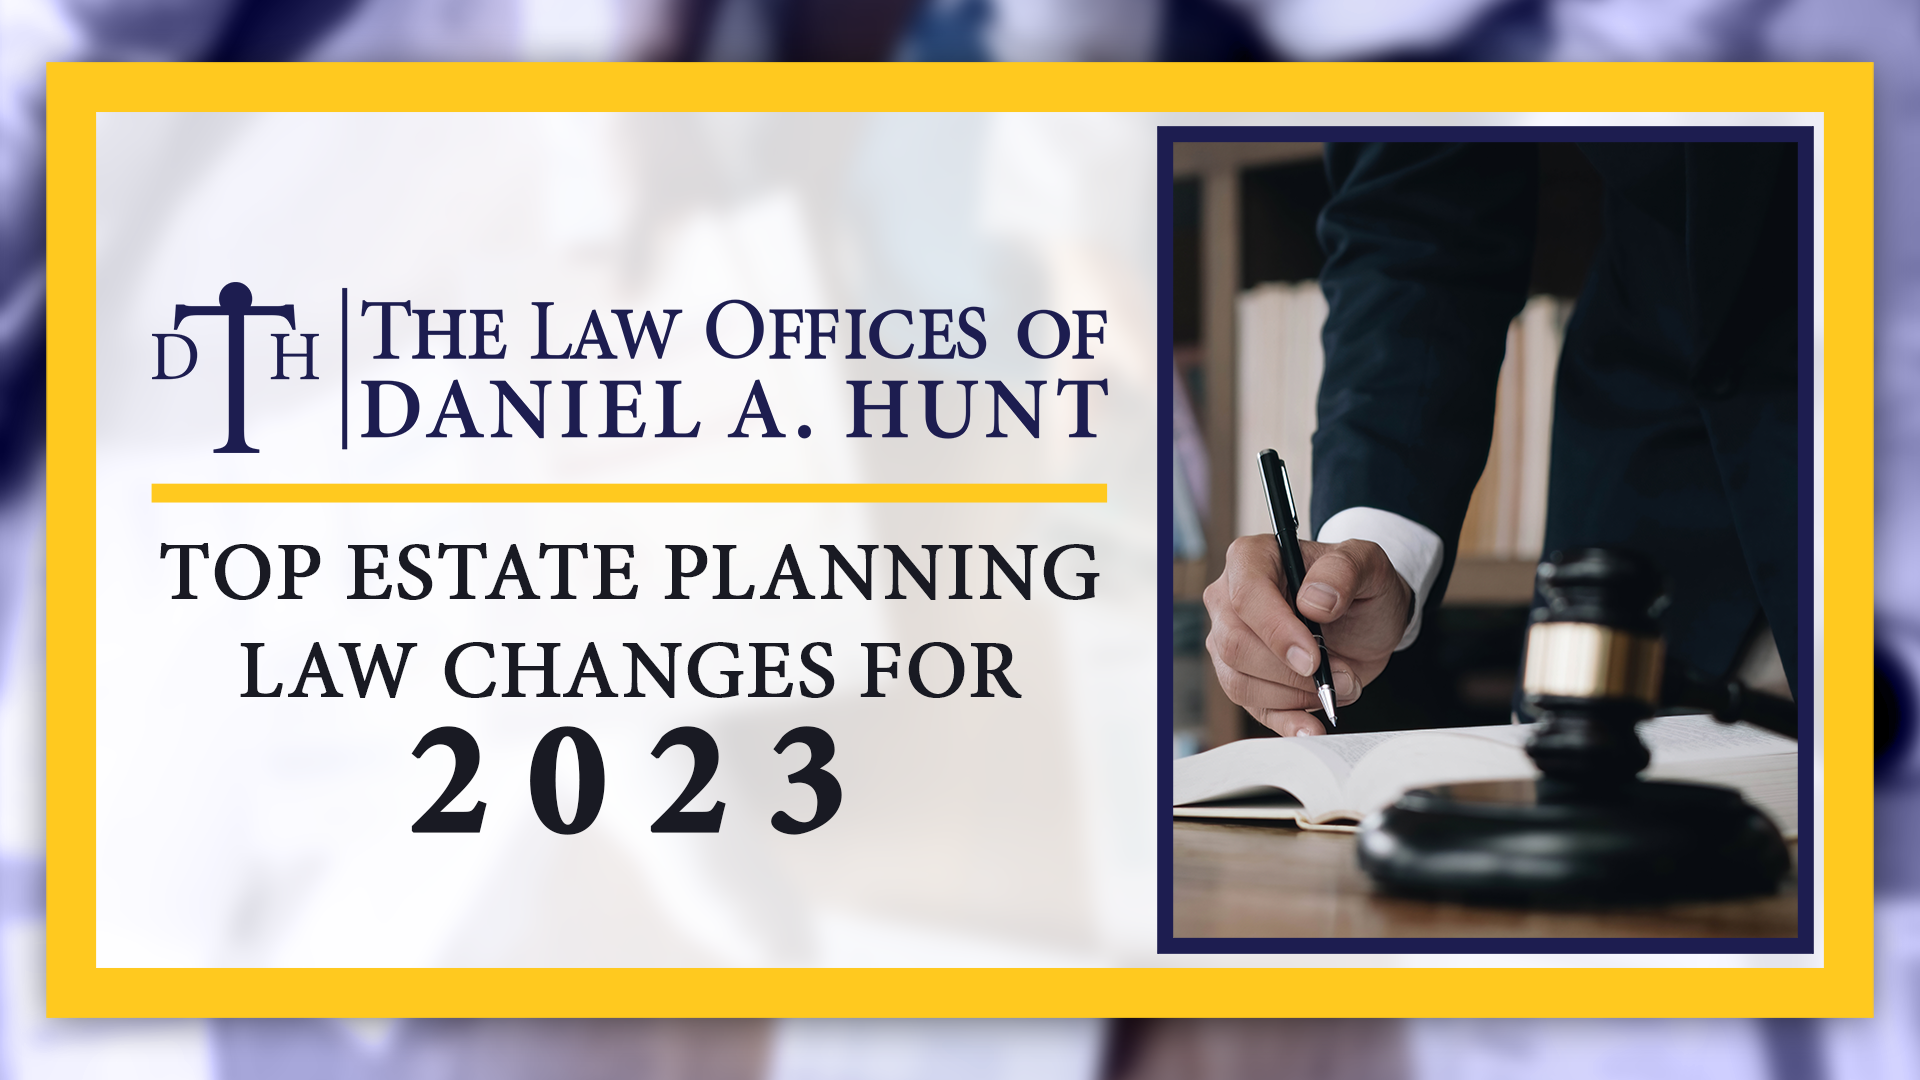 Top 2023 Estate Planning Law Changes